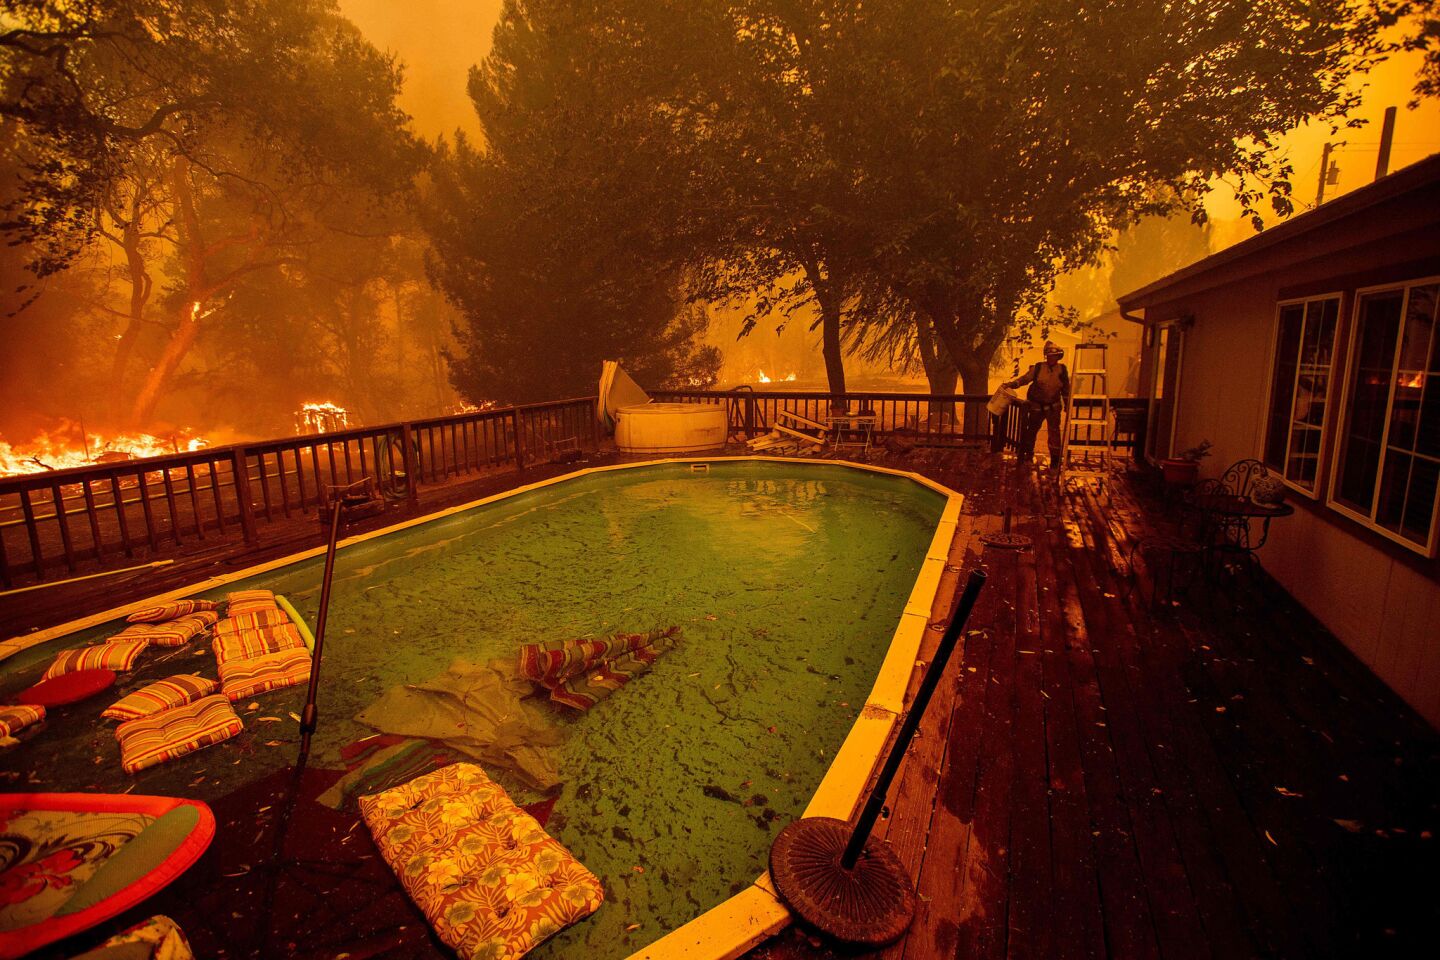 A firefighter gathers water from a pool while battling the Ranch Fire near Clearlake Oaks on Saturday.